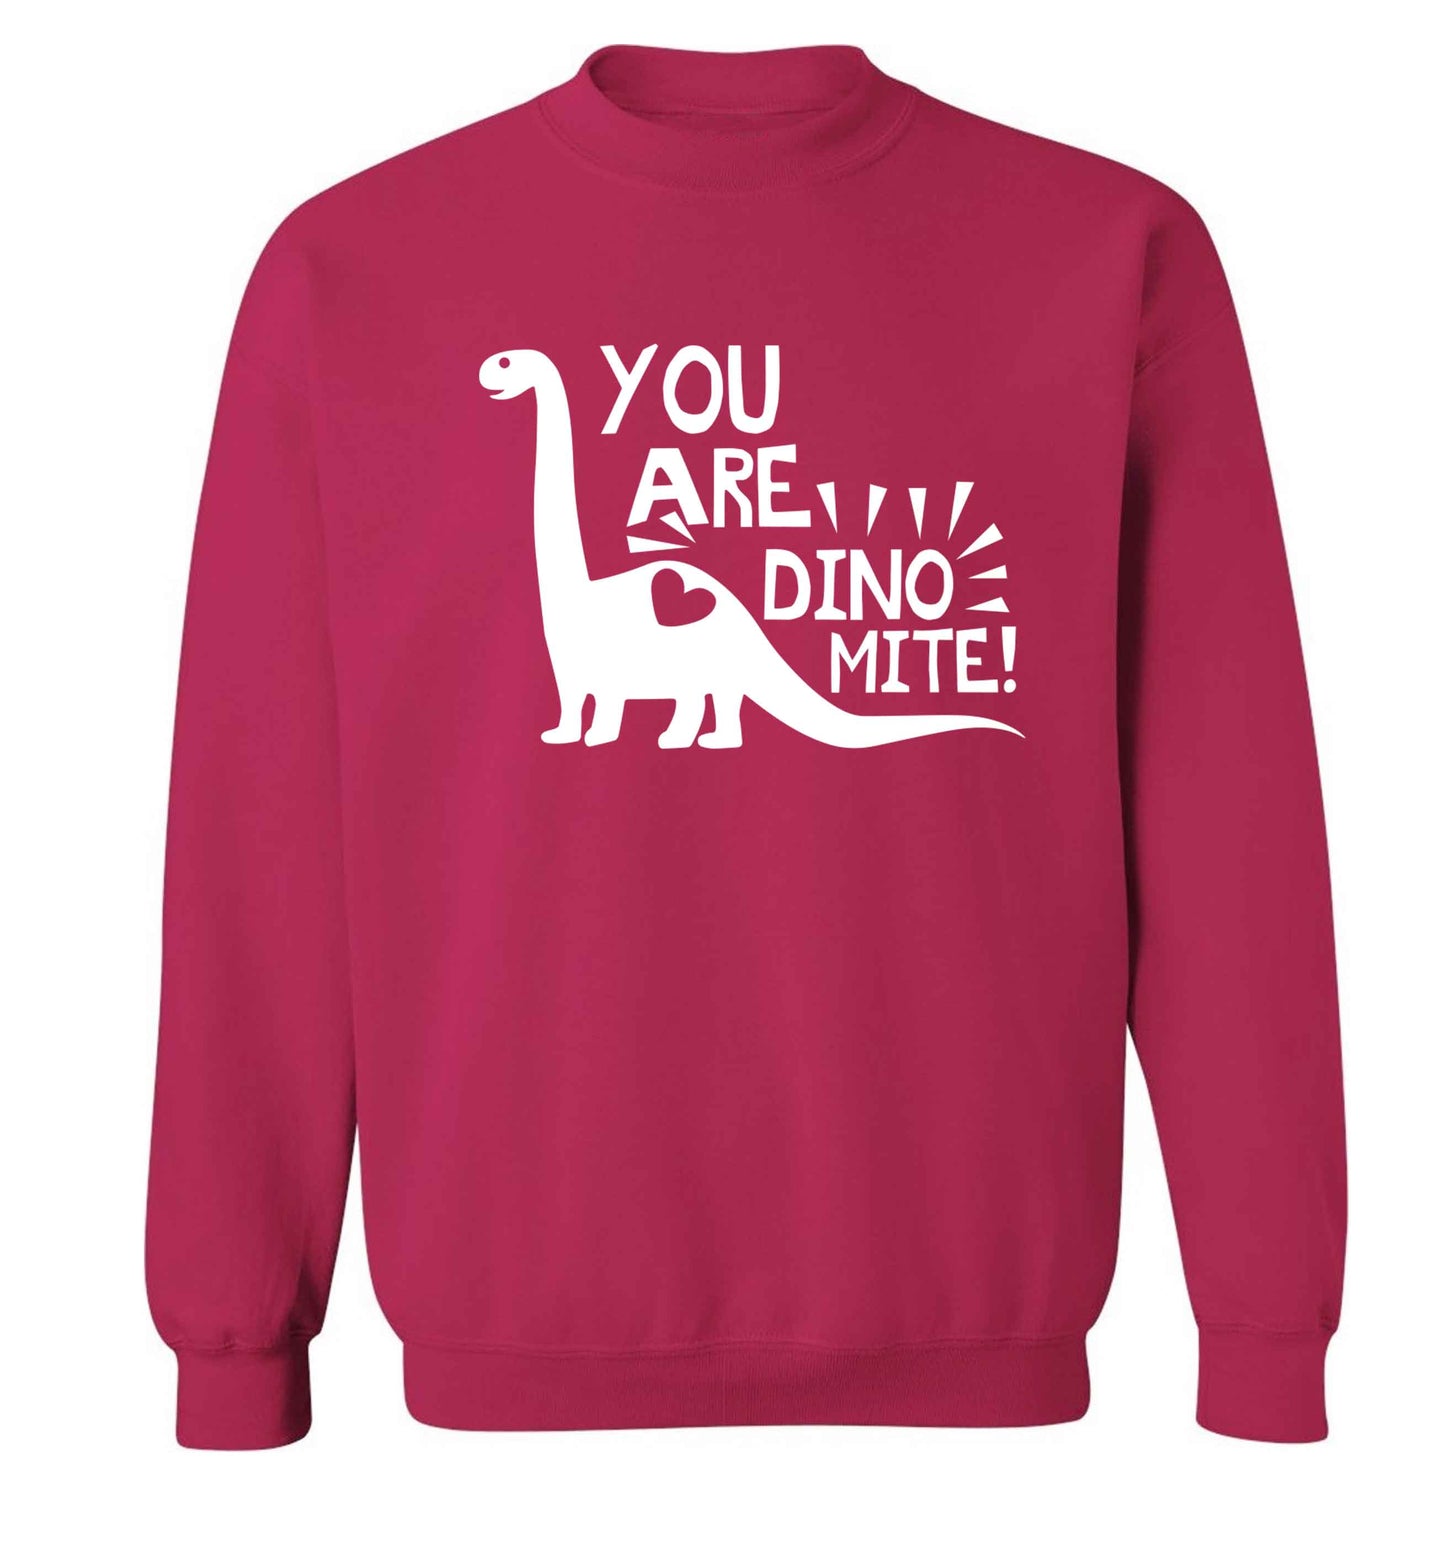 You are dinomite! Adult's unisex pink Sweater 2XL